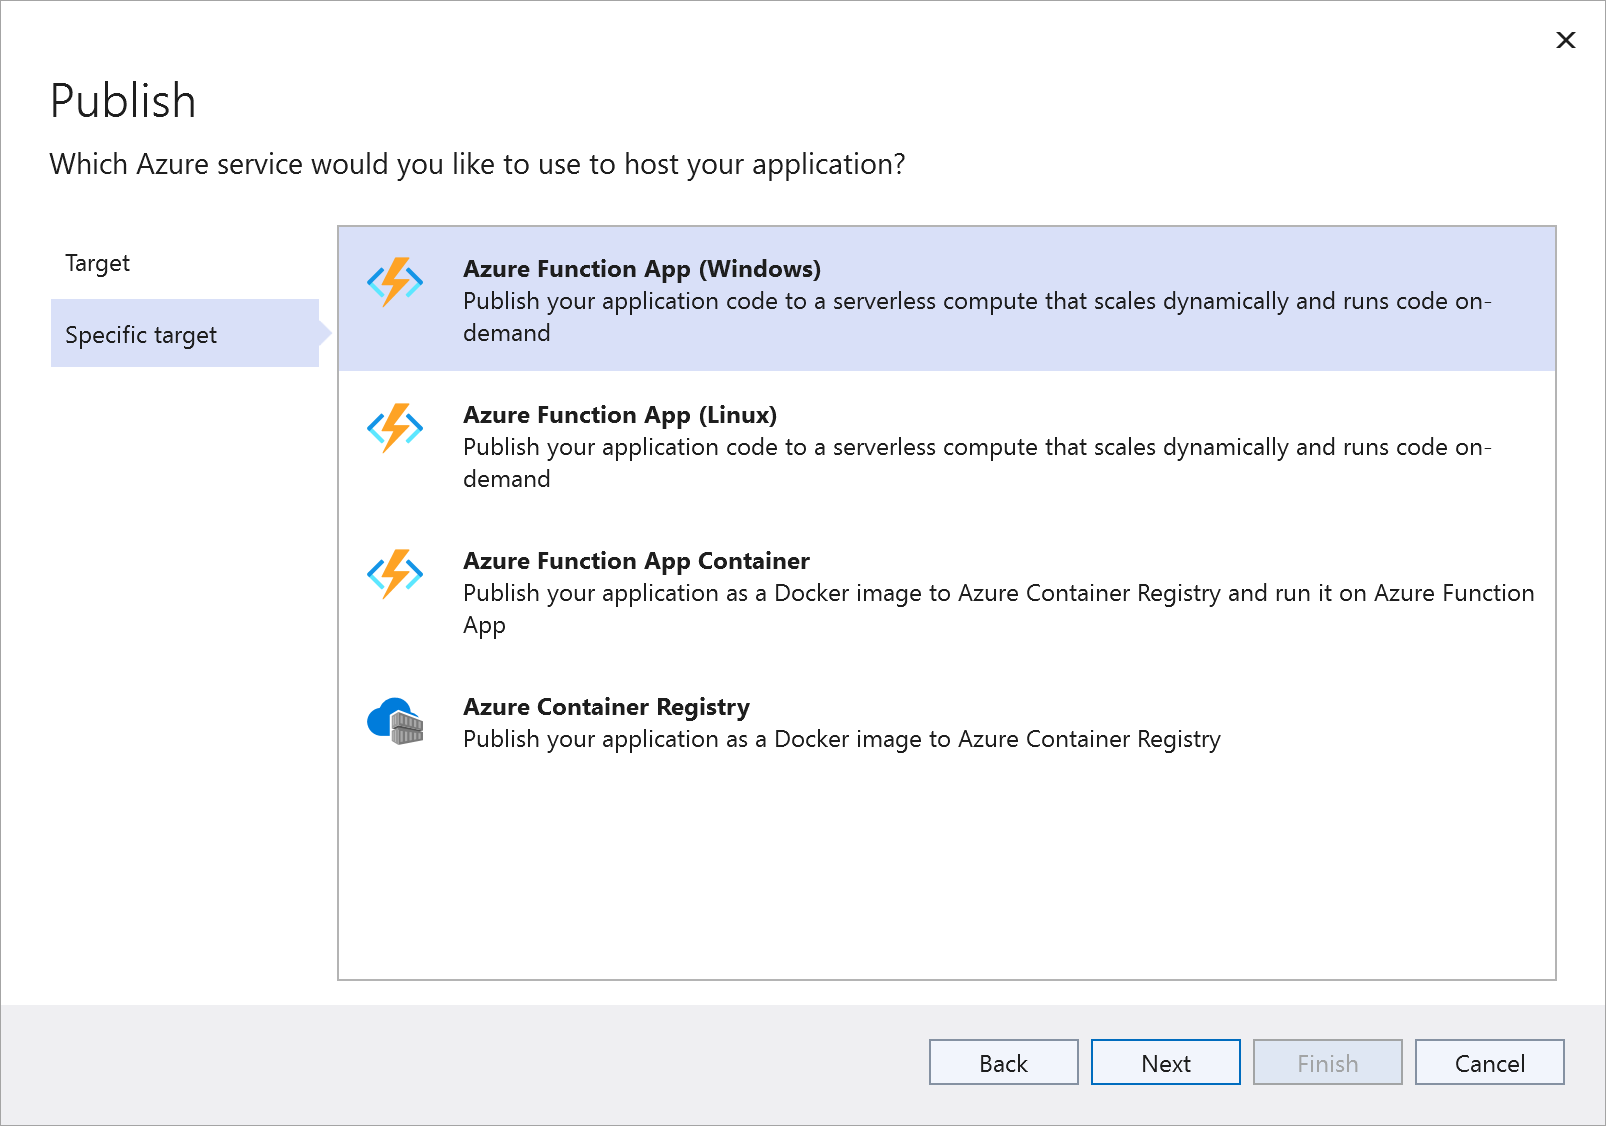 Screenshot of the Publish specific target window with the Azure Function App (Windows) option highlighted.